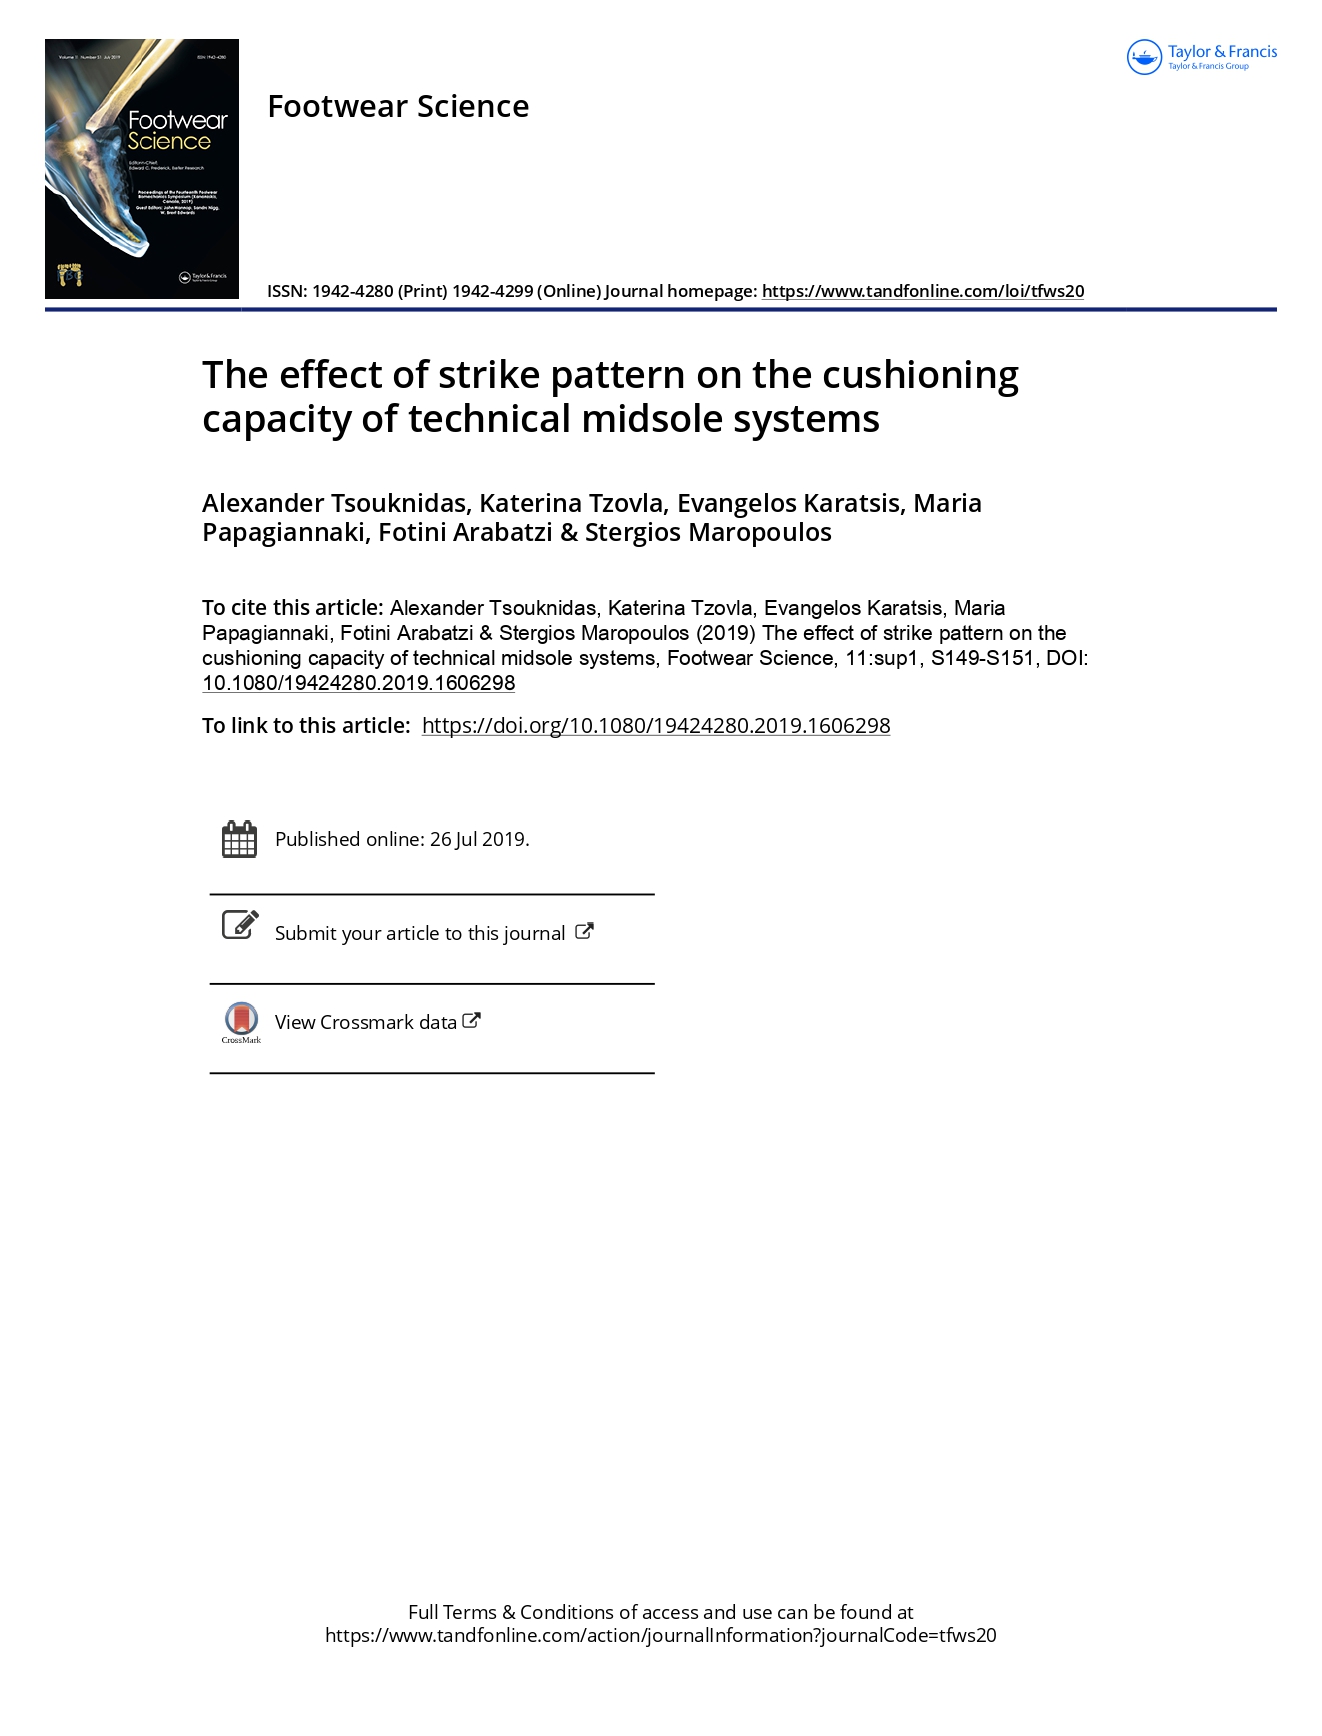 The effect of strike pattern on the cushioning capacity of technical midsole systems_page-0001.jpg